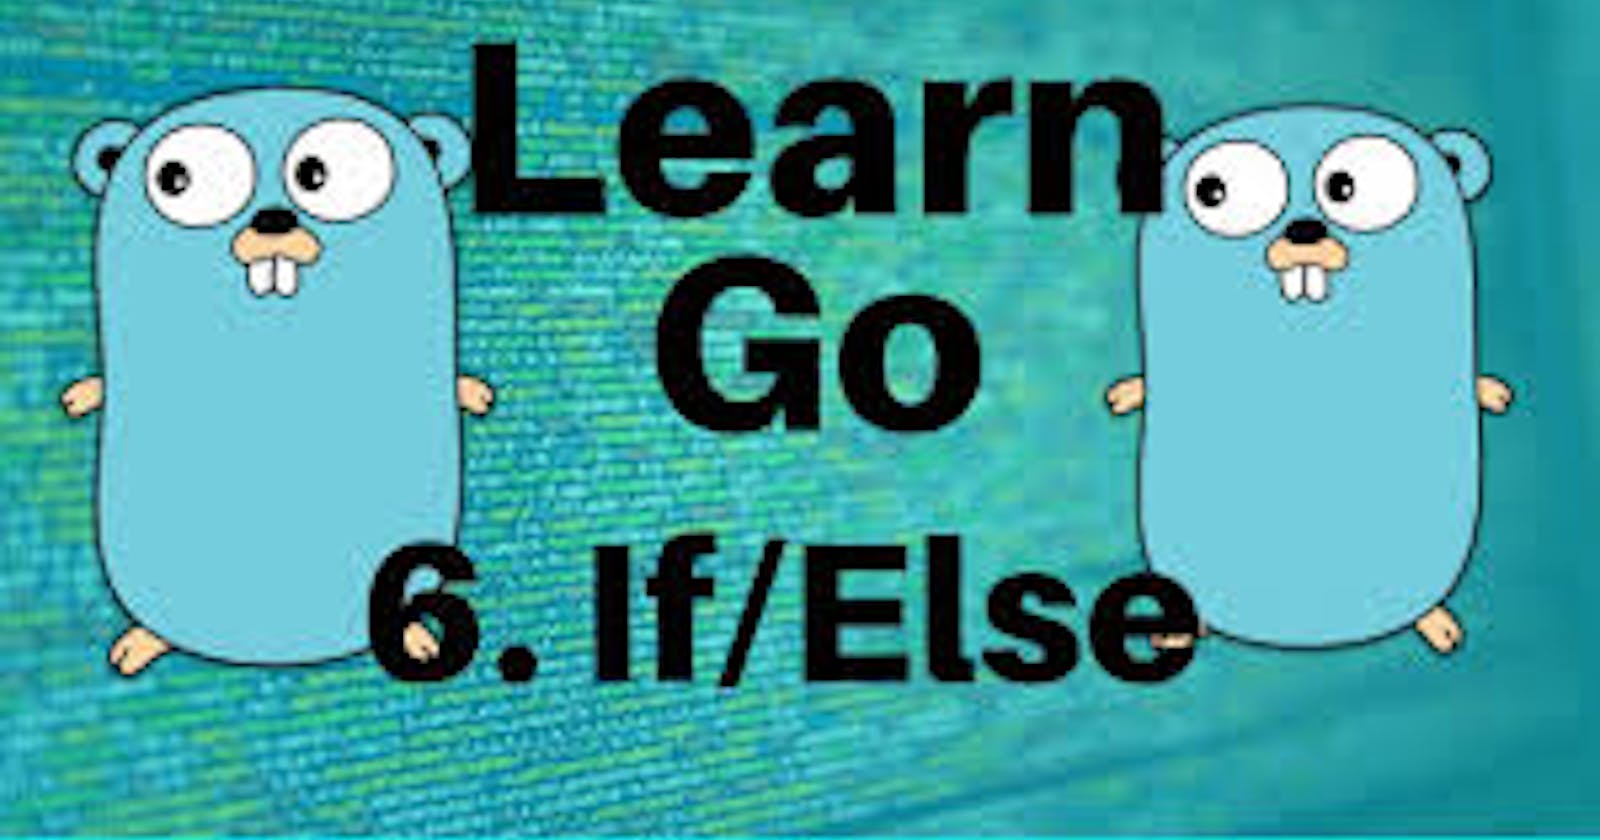 IF and Else statement in Golang